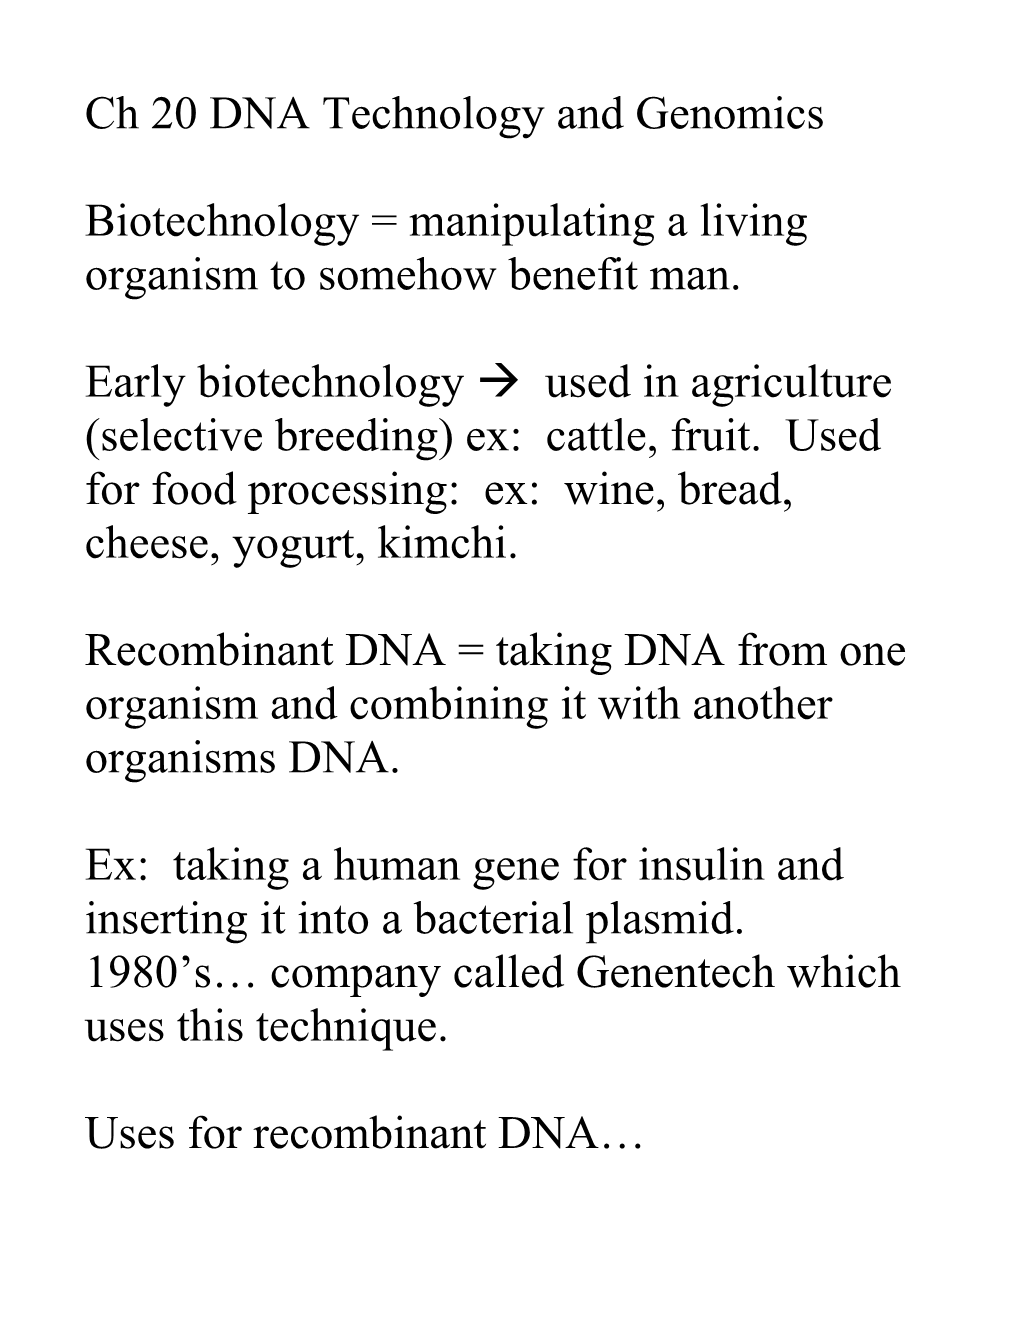 Ch 20 DNA Technology and Genomics